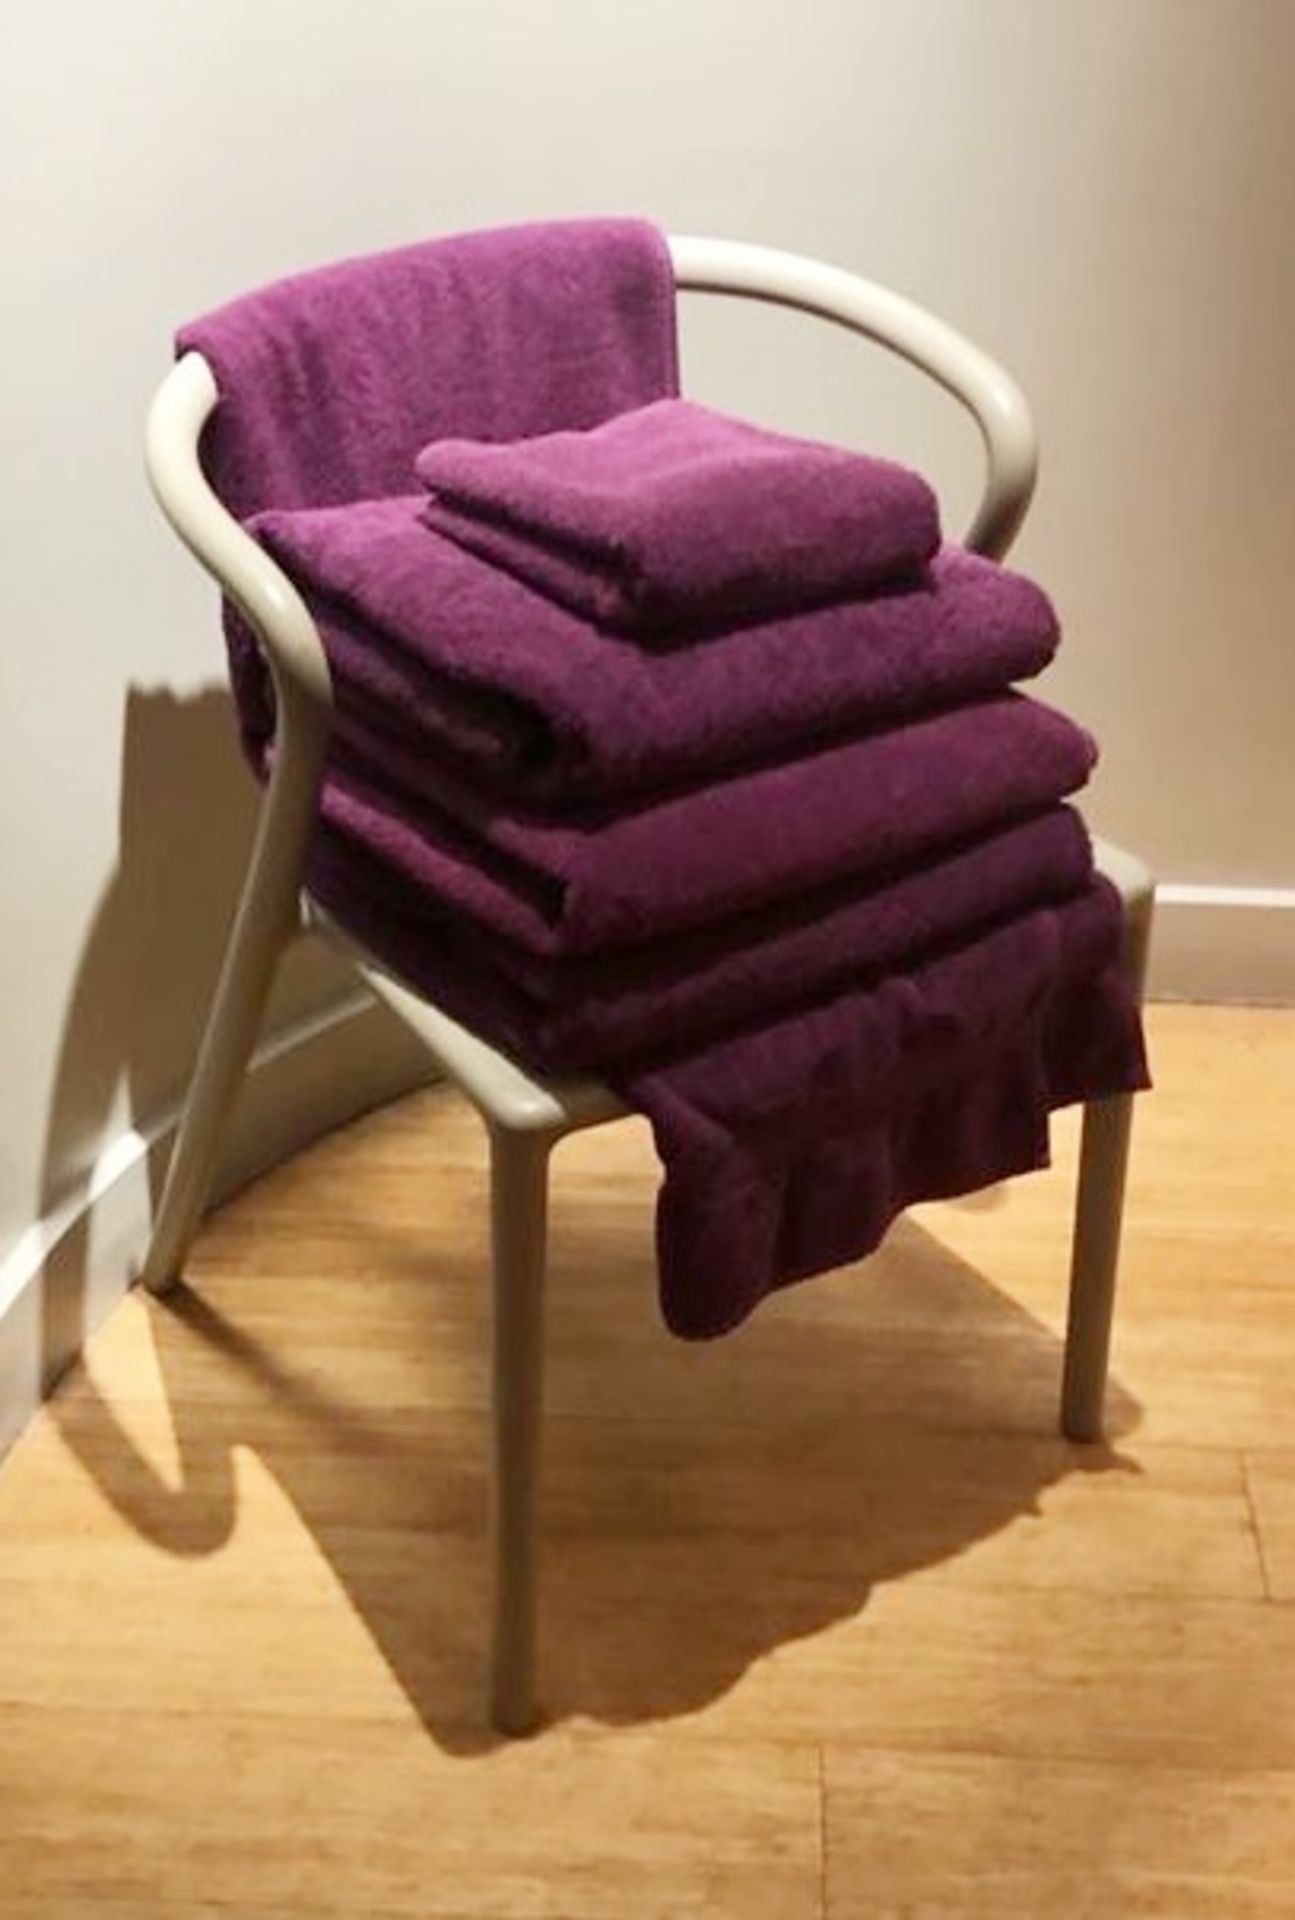 30 x Majestic Luxury 620gsm Bath Towels in Purple - Size MEDIUM - RRP £290 - CL587 - Location: - Image 3 of 4